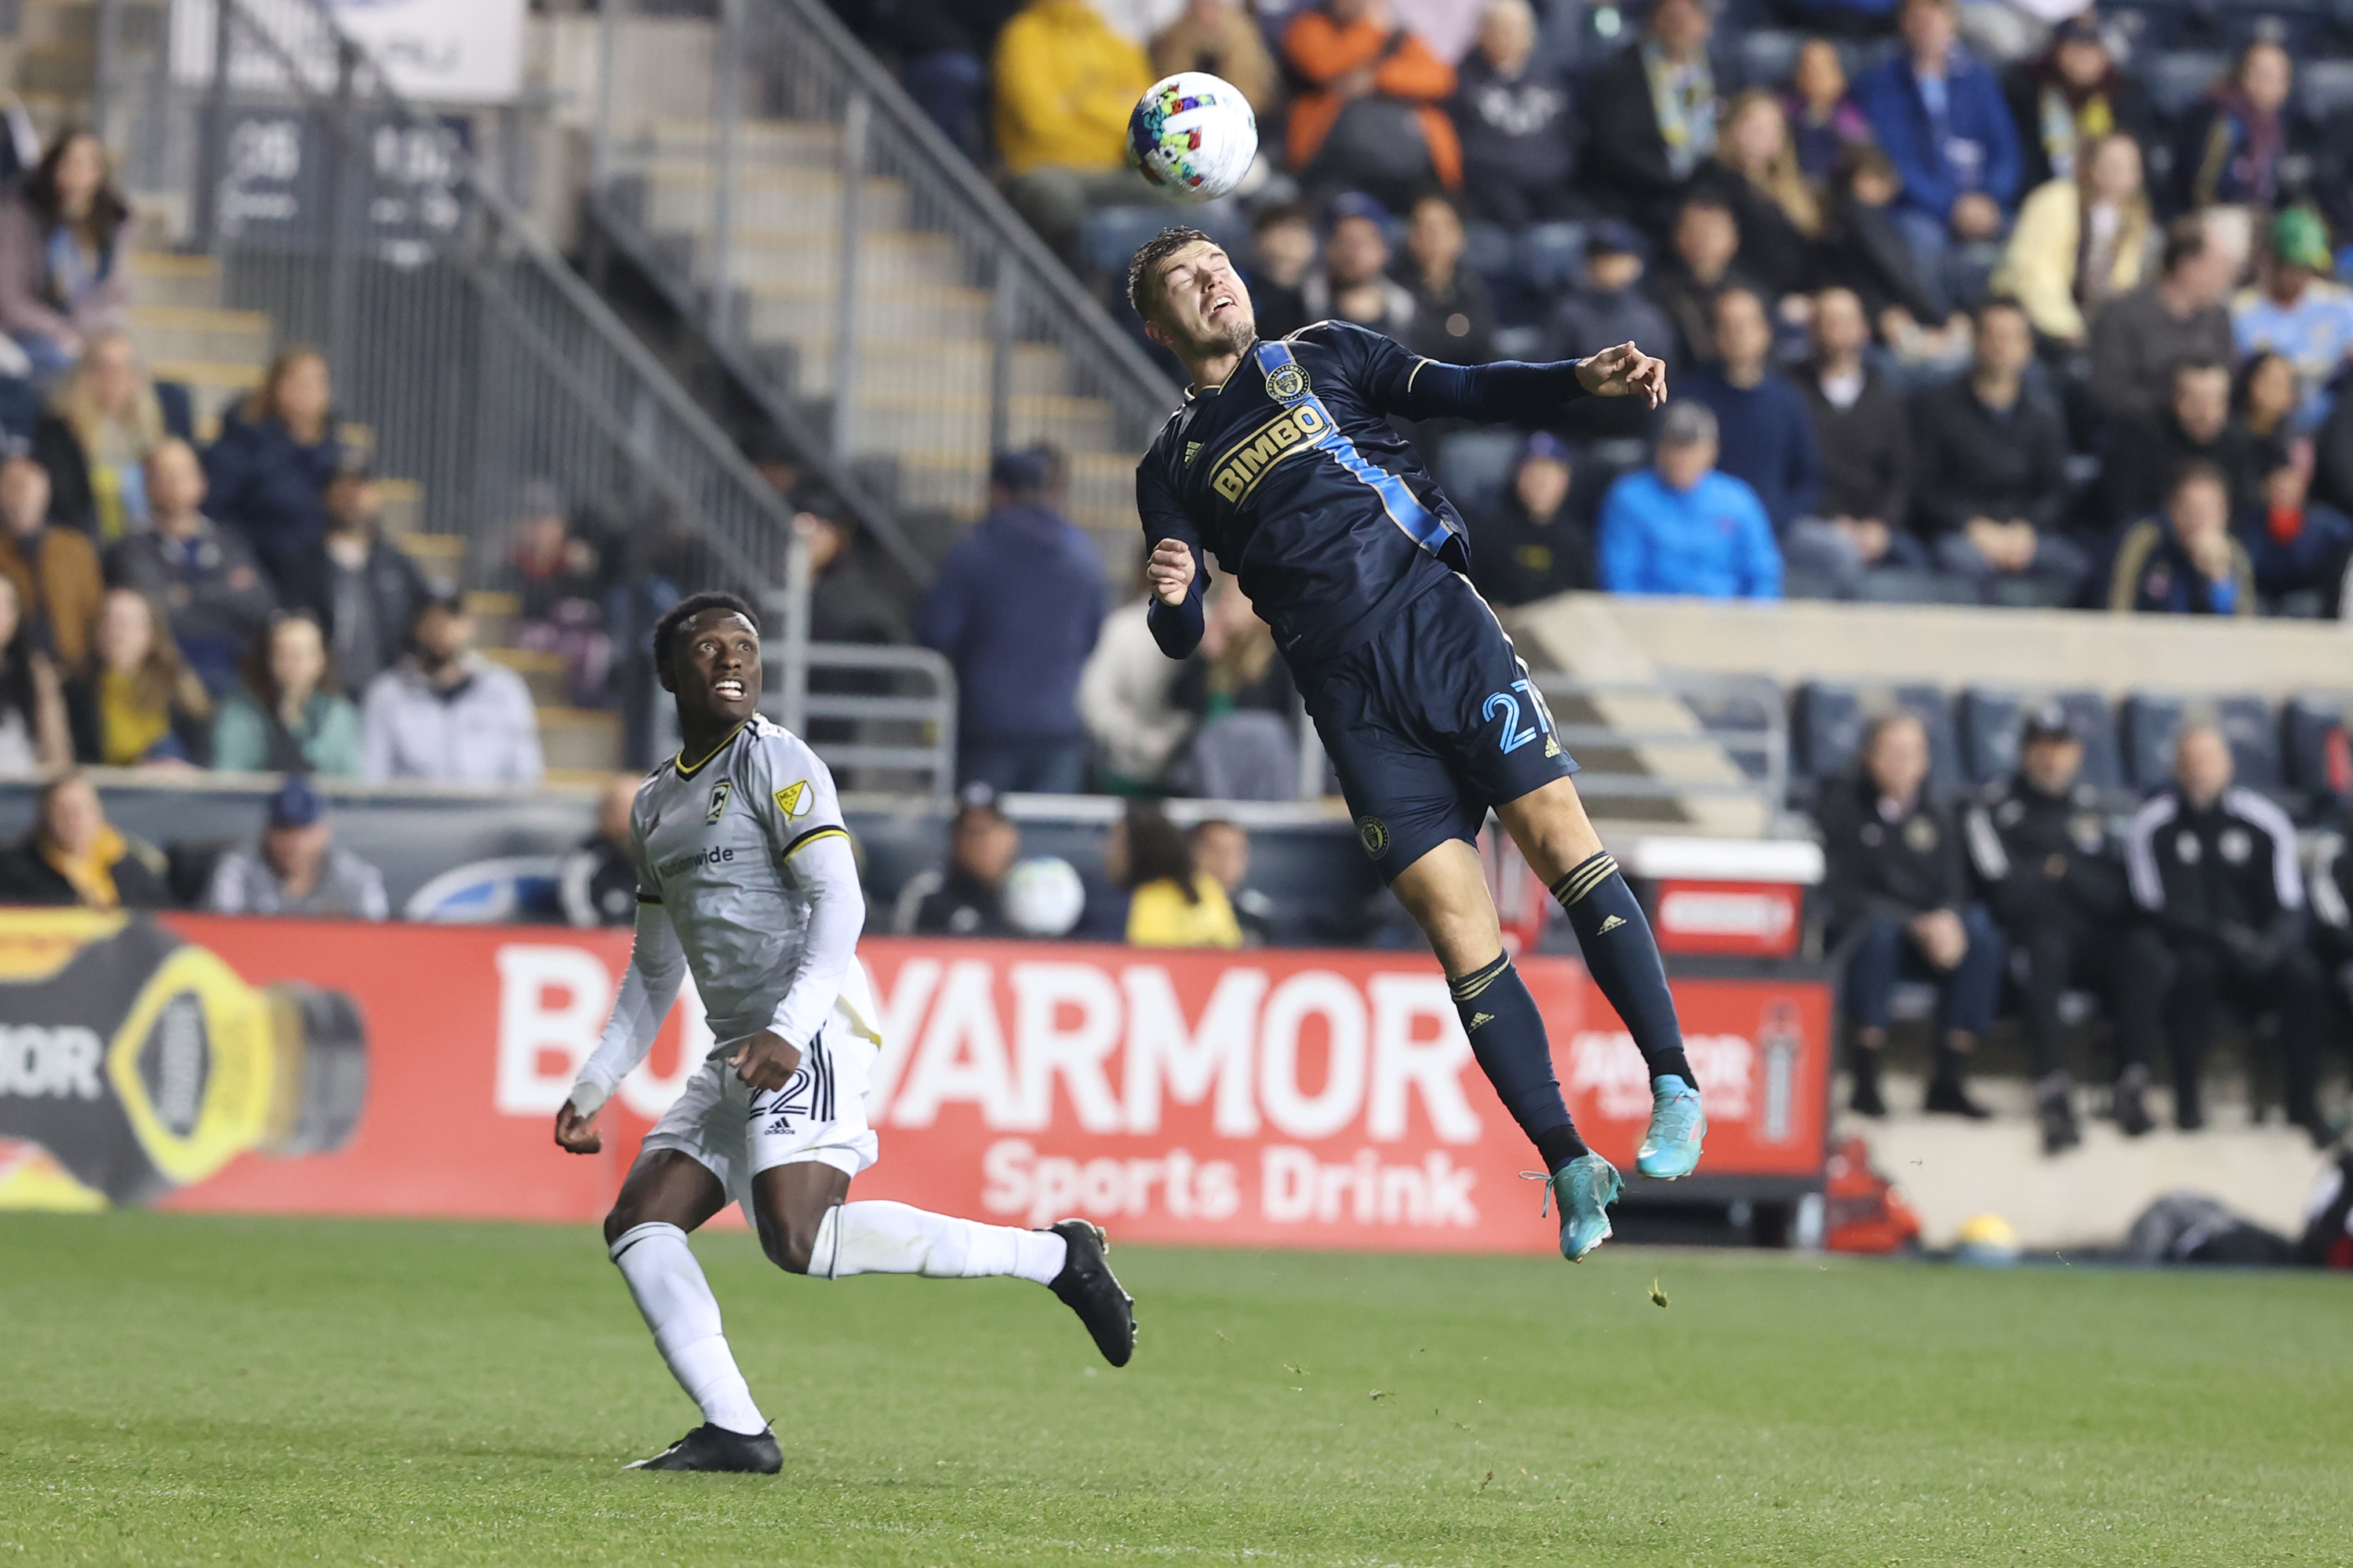 Union remain undefeated with 1-0 victory against Columbus Crew